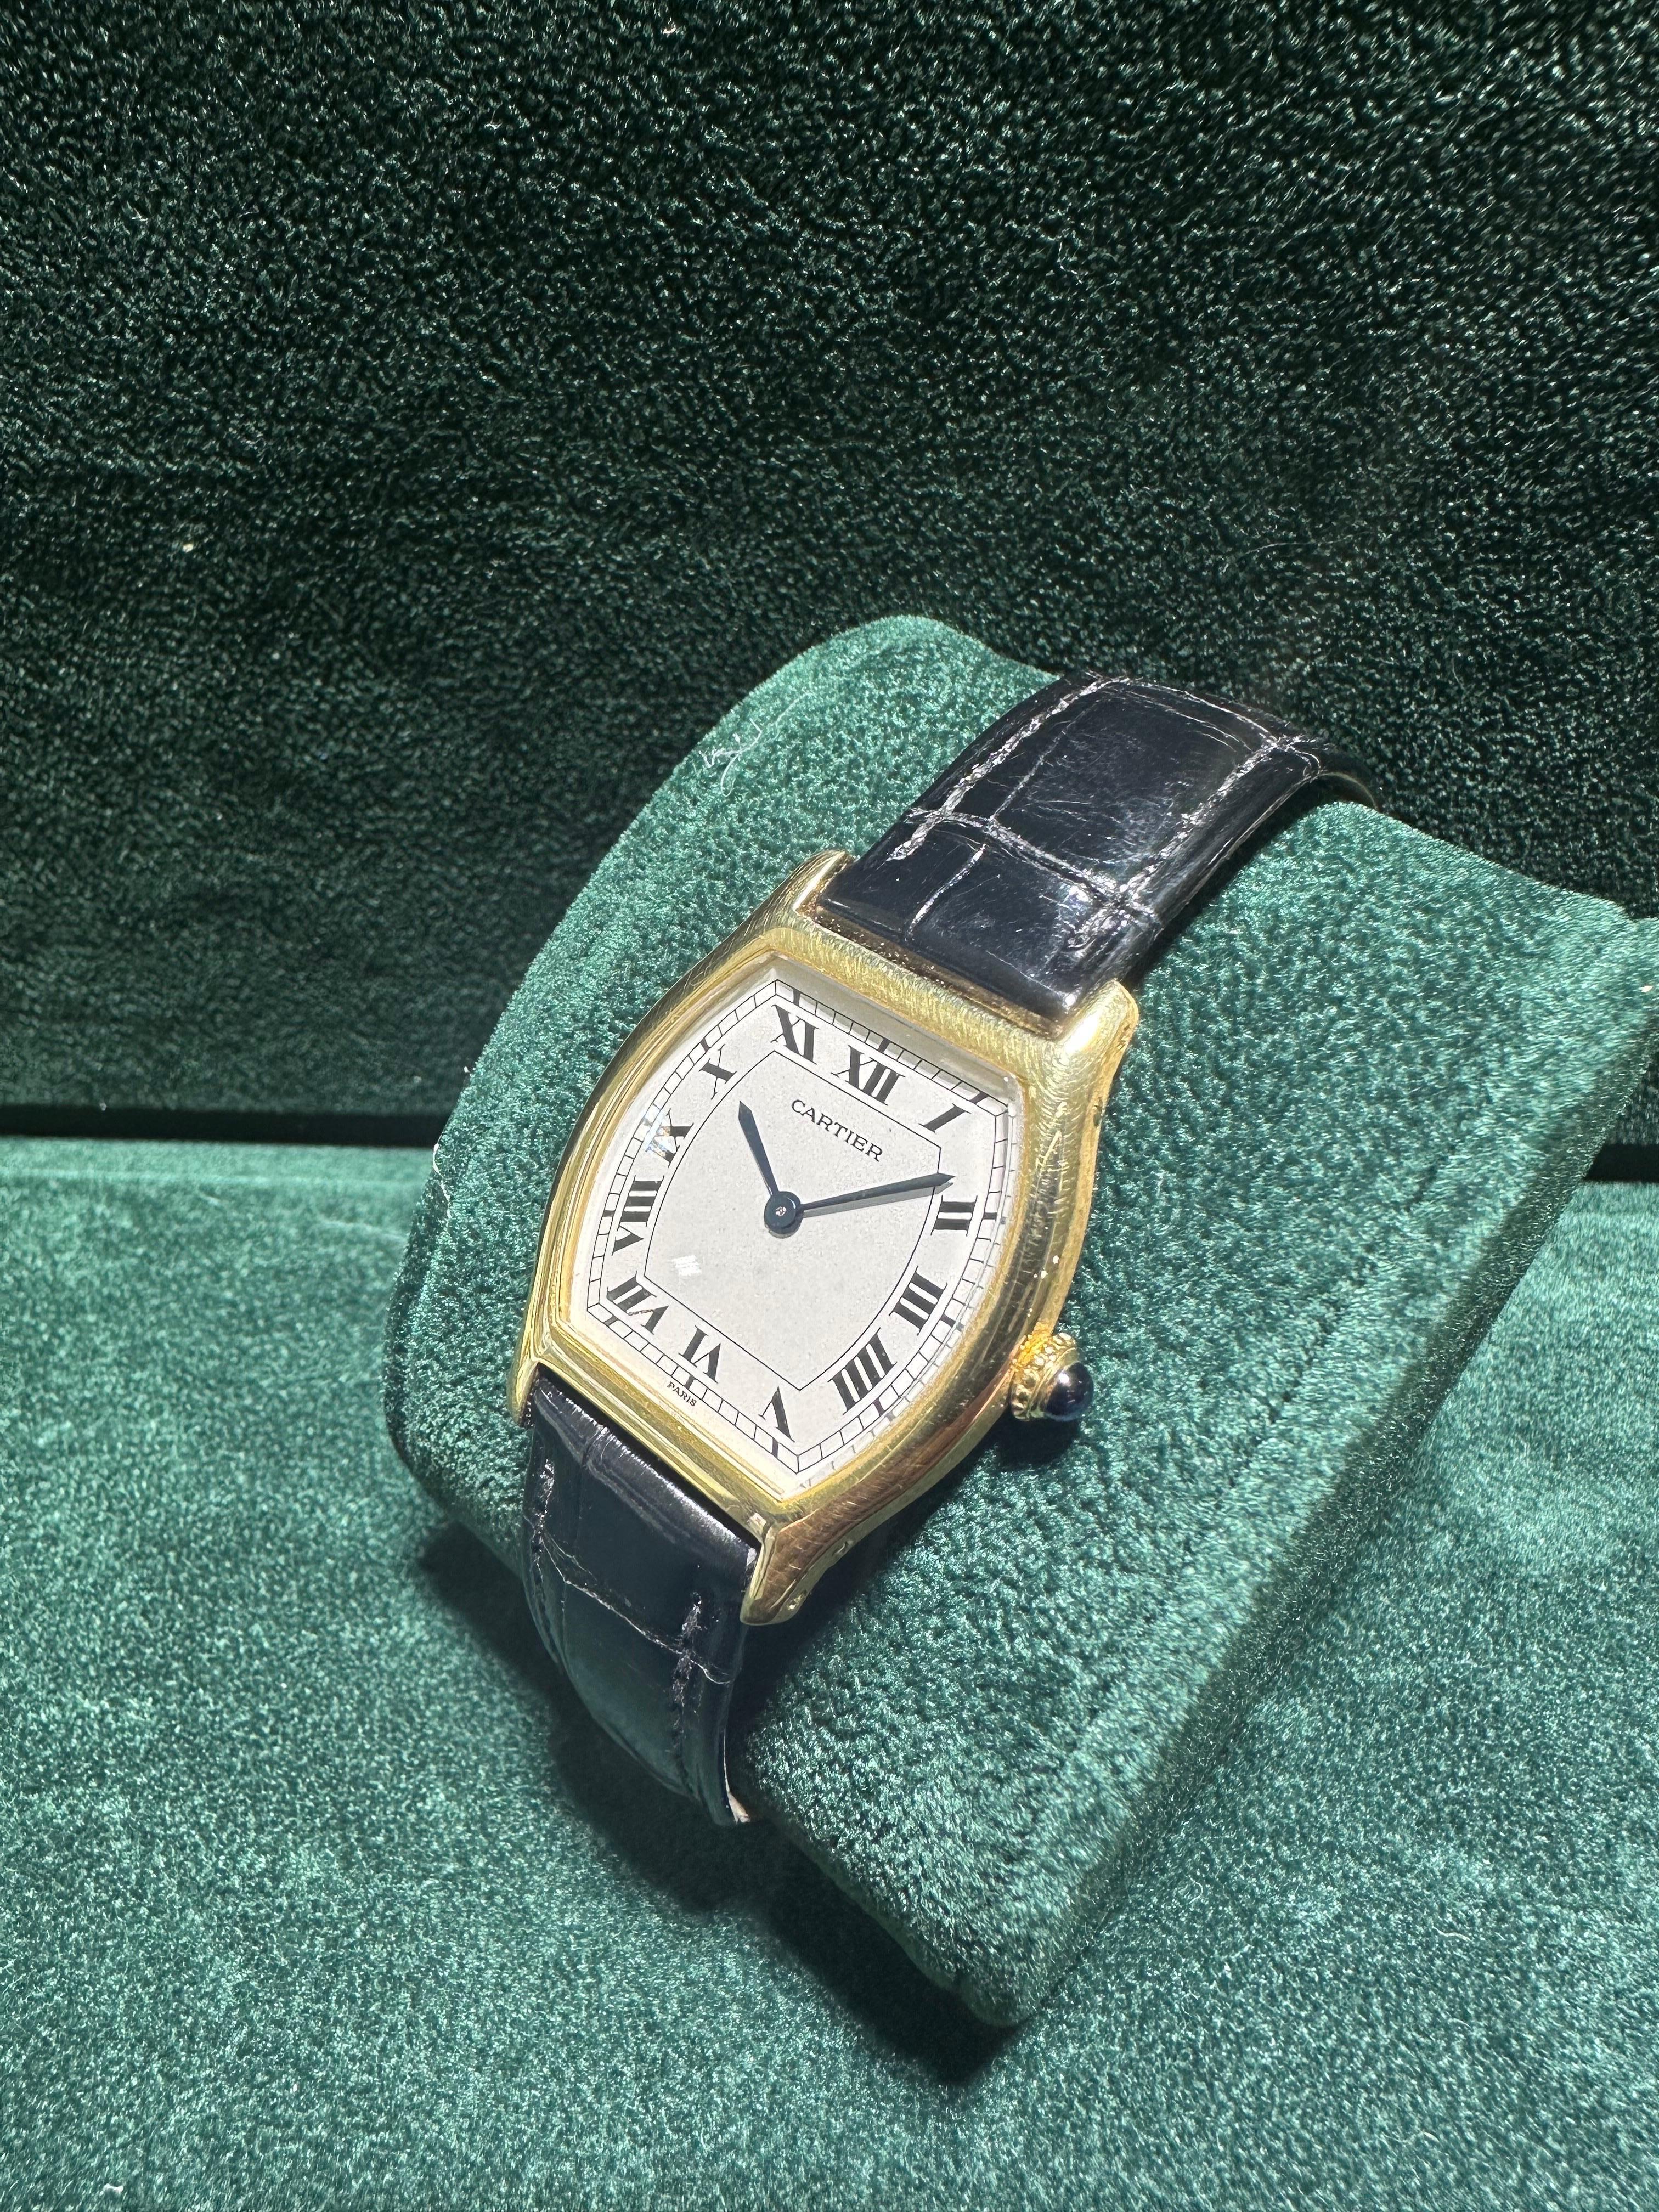 The Cartier Tortue was introduced in the 1975. In 1973, 12 models were commercialized within the new Louis Cartier collection (Ceinture, Square, Ellipse, Santos, Baignoire, Vendôme, Cristallor, Gondole, Fabergé, Coussin, Tank Normale and Tank Louis